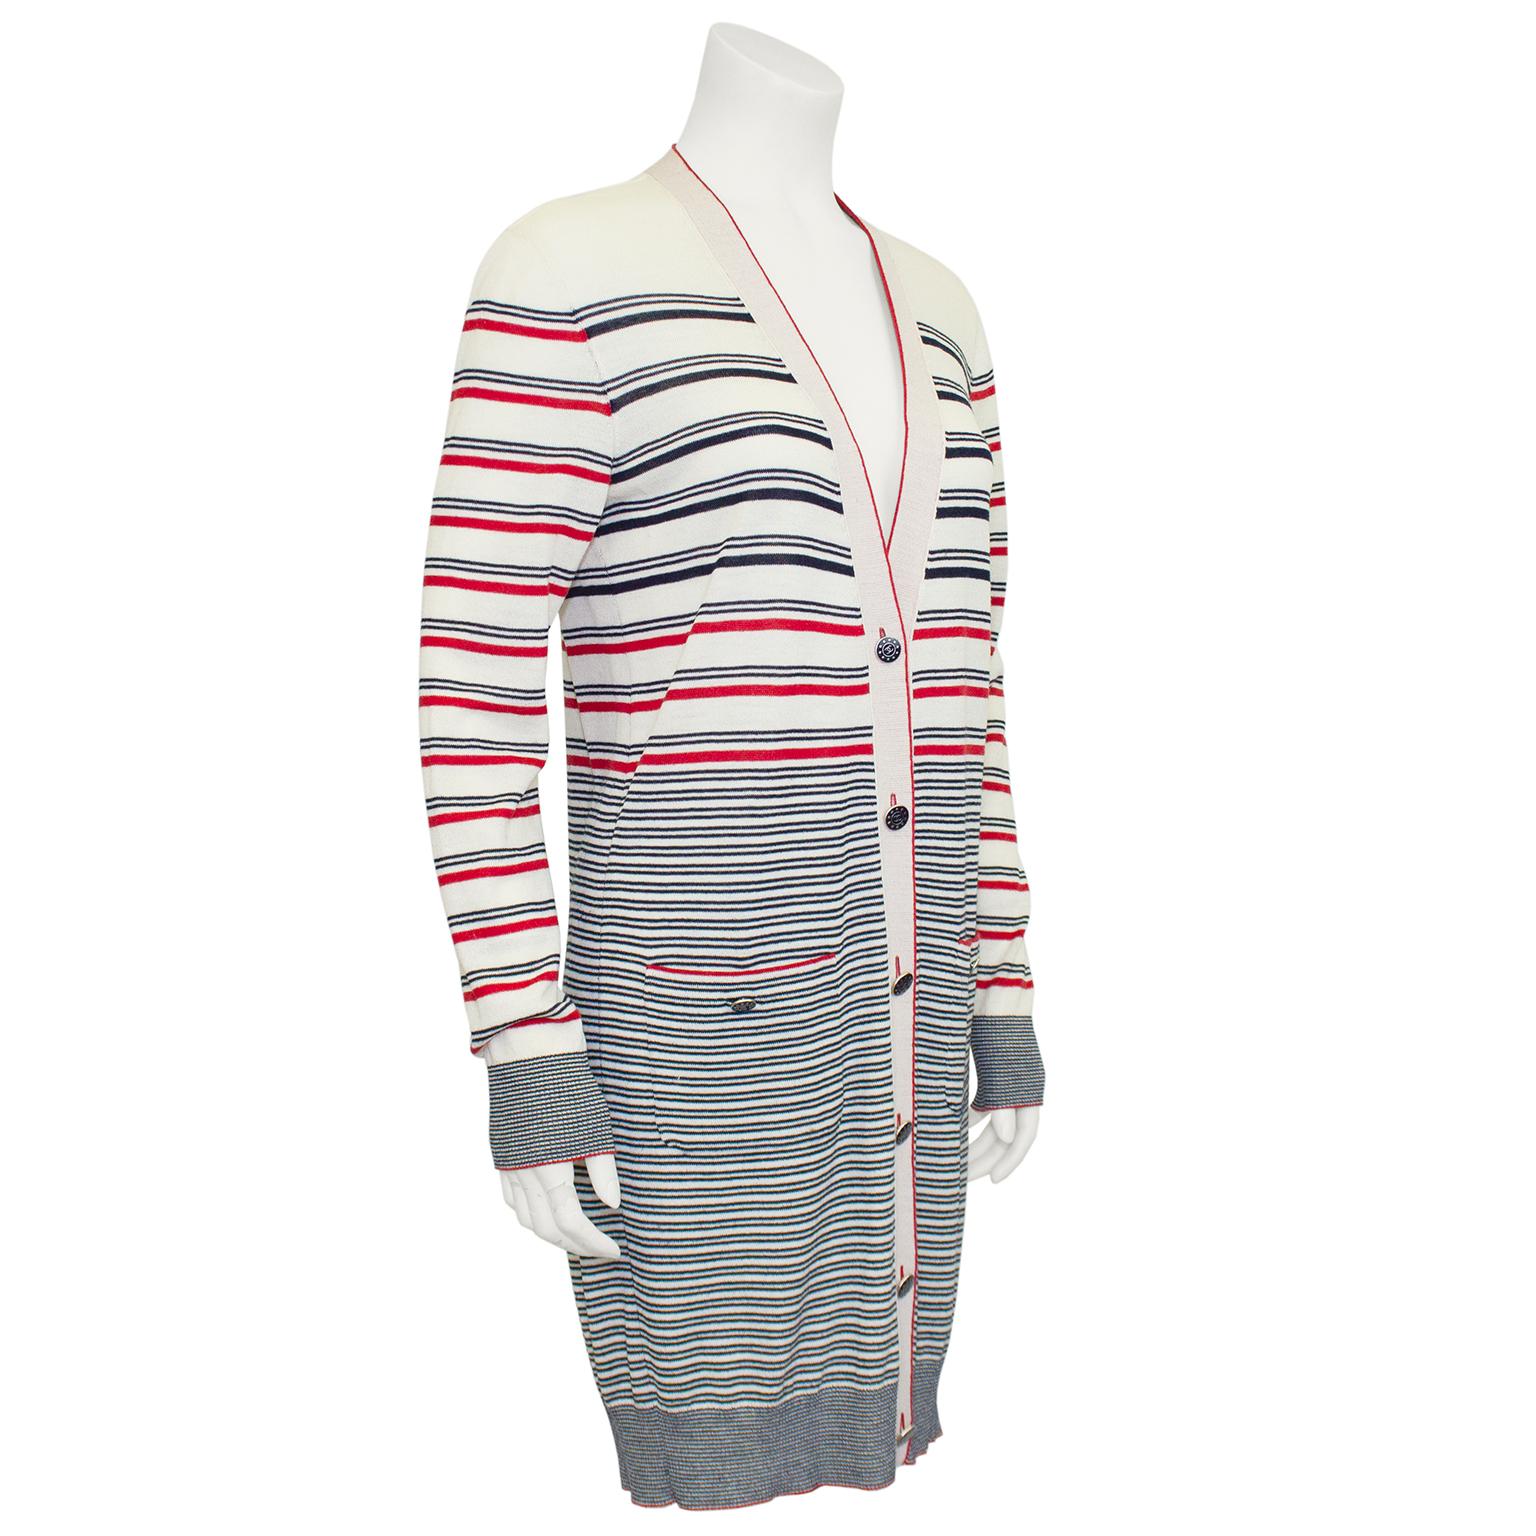 2012 Chanel striped knit cardigan. Cream with black and red horizontal stripes throughout. A great seasonal layering piece, as it is light weight enough to wear on a summer evening or layered over a black turtleneck in the winter. V neckline with